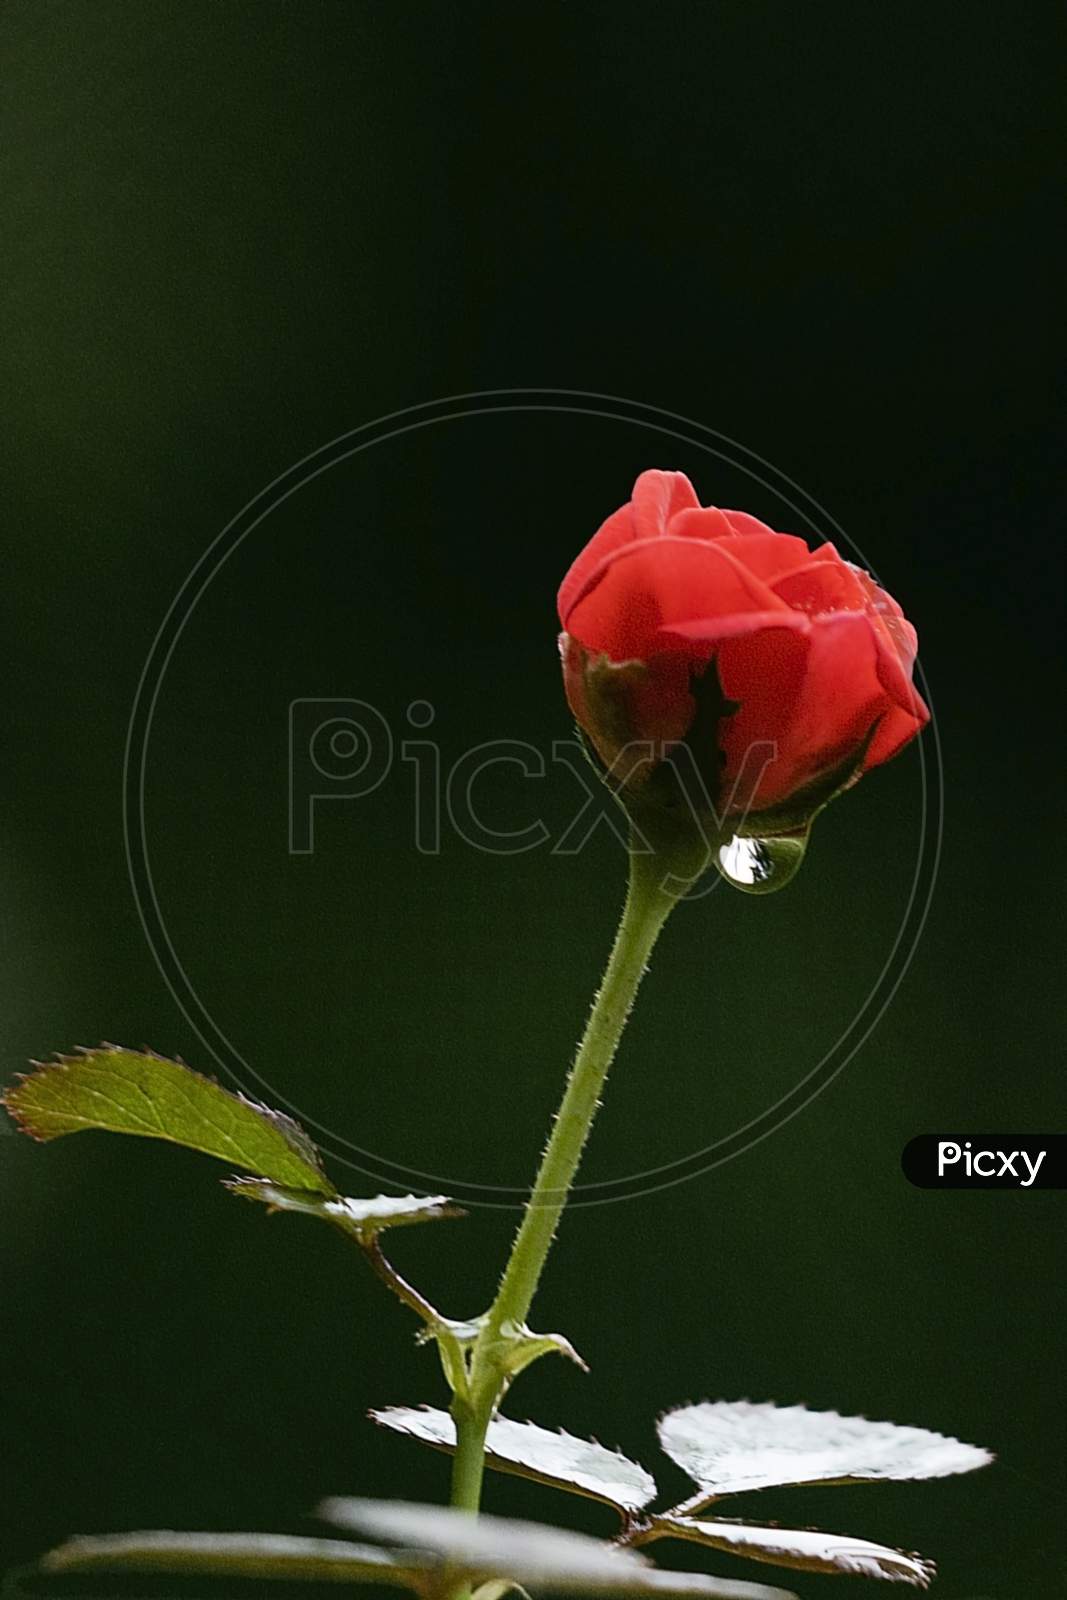 A Rose Bud And The Raindrop